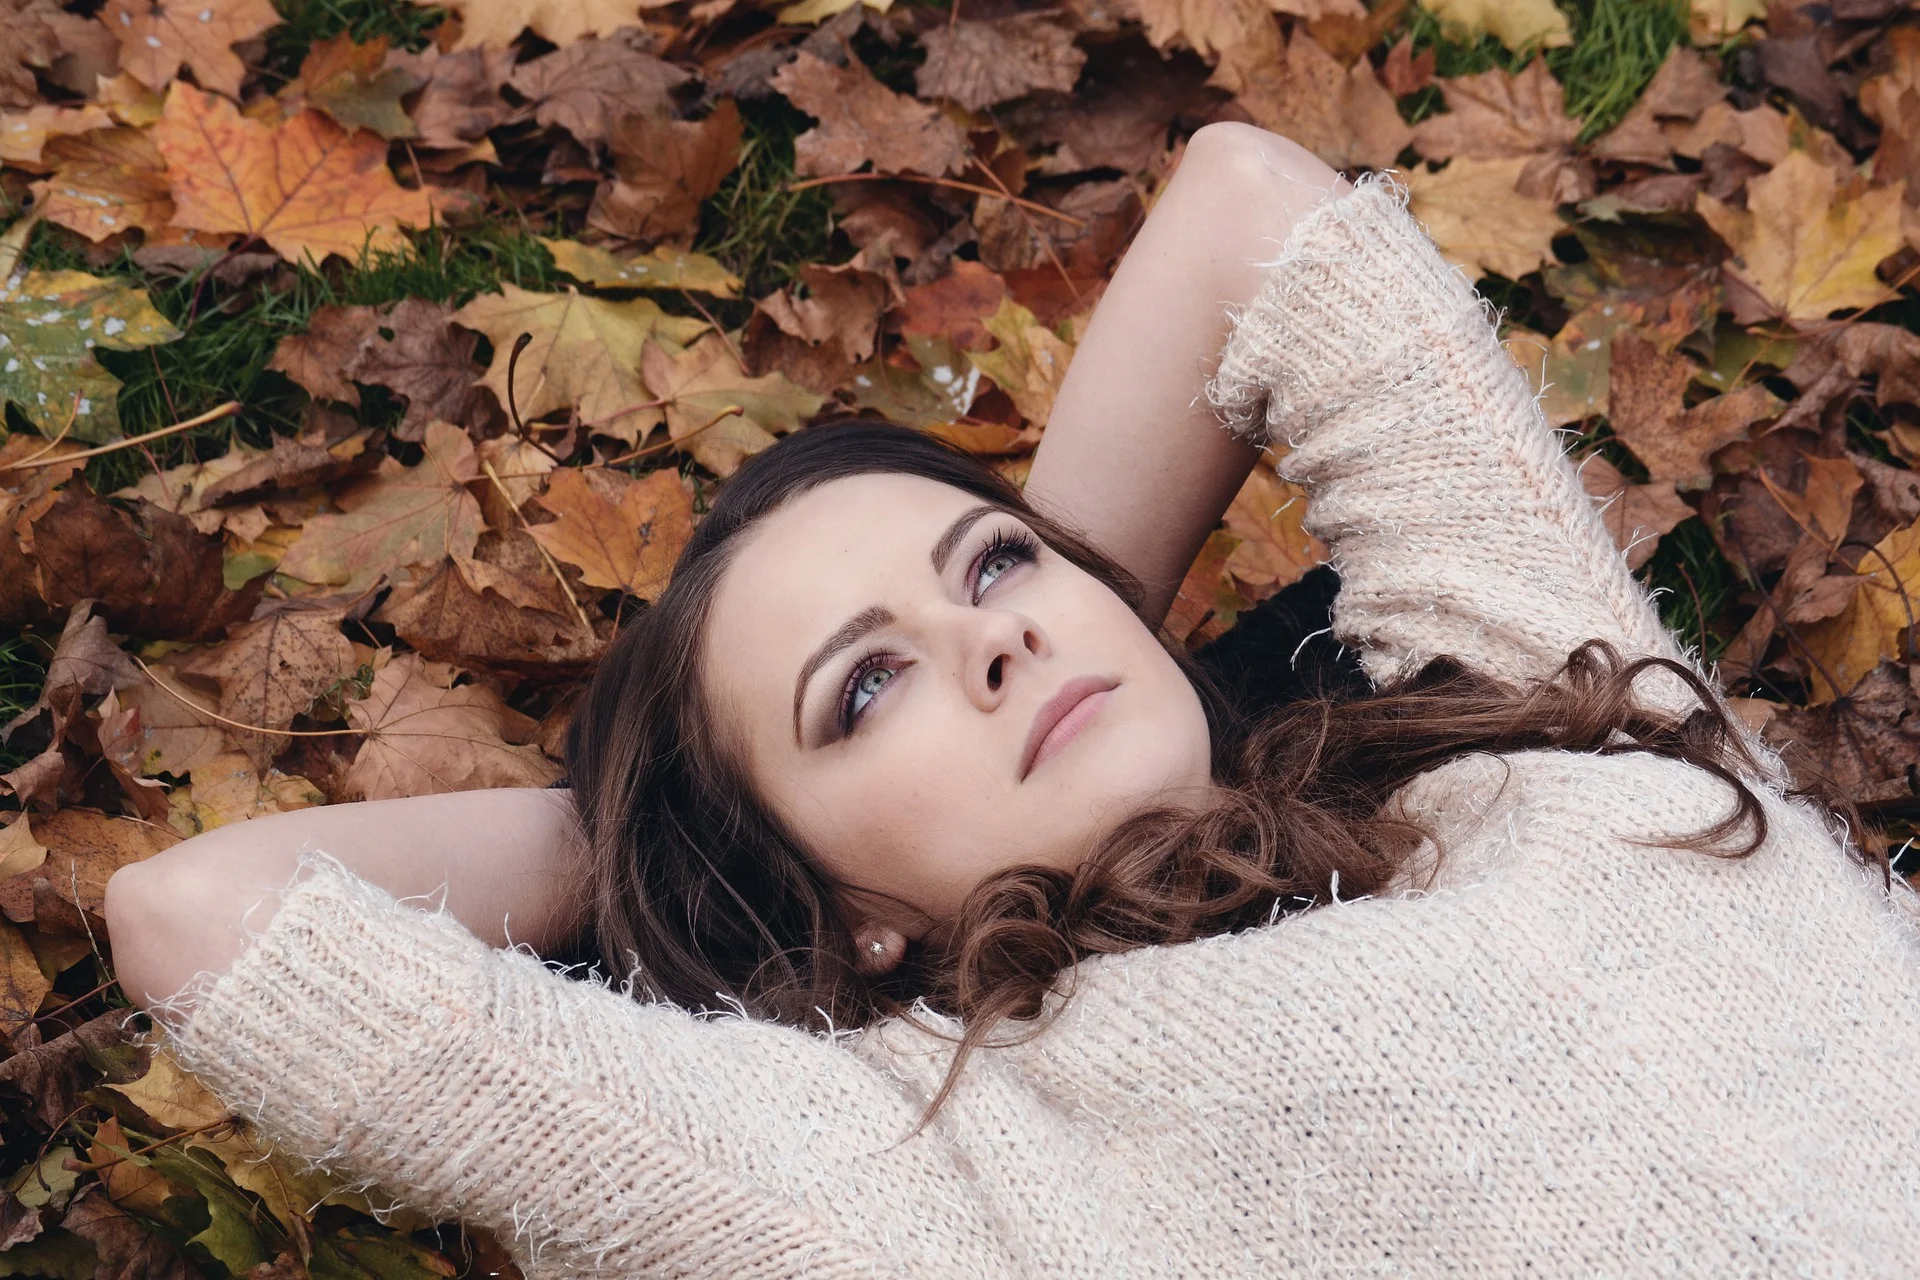 Girl laying in leaves reflecting on self-awareness